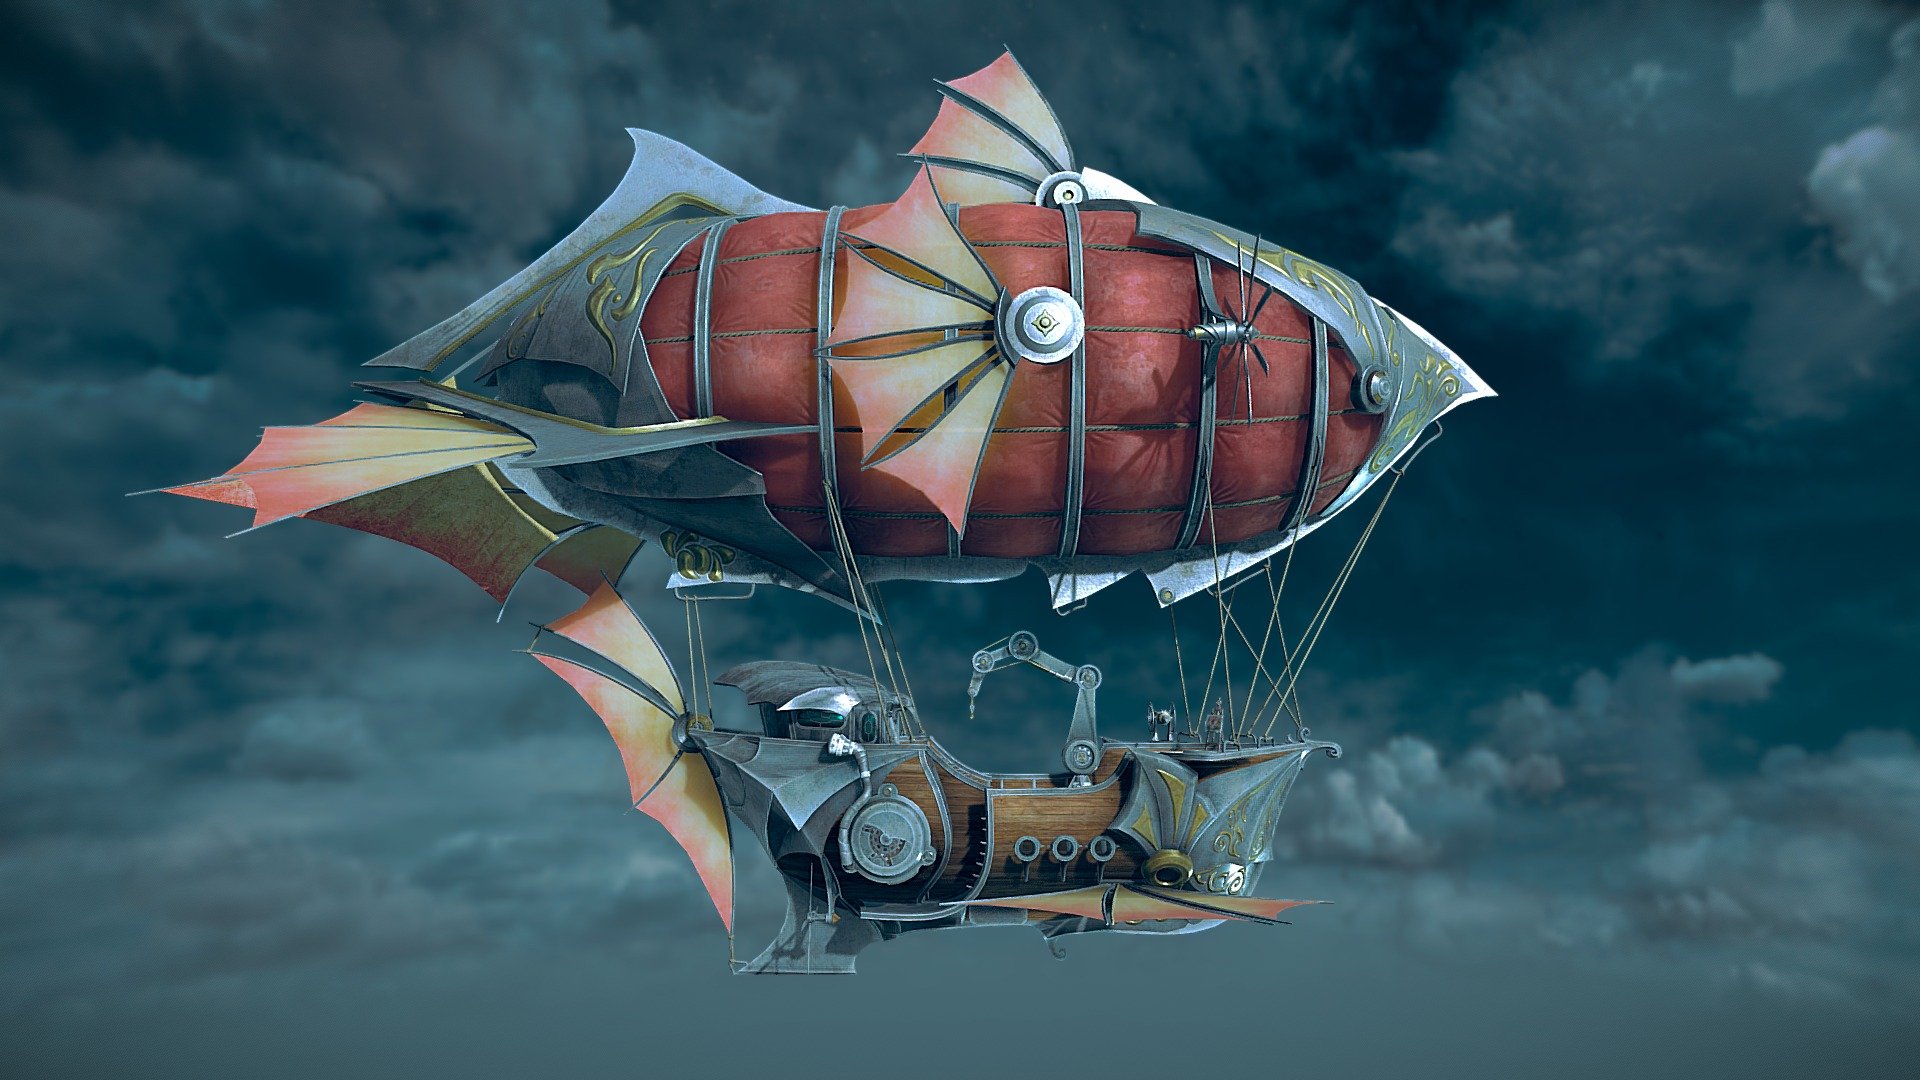 For those who purchased: Make sure to download Aditional File - It contains .blend file with all the textures and additional props.

Crane on the airship has a soul of its own. When the captain is locked in hers cabin - mechanism starts painting on the canvas. It doesn't know it's being watched by the cannon&hellip; Things turn sour when the gust of wind blows the canvas away! Made in Blender 2.8. Music by me.
Check my page:https://conradjustin.com/portfolio/
Additional files include blender 2.82 scene with rigging and UE4.24 assets.
 - Creative Crane (animated) - Buy Royalty Free 3D model by Conrad Justin (@ConradJustin) 3d model